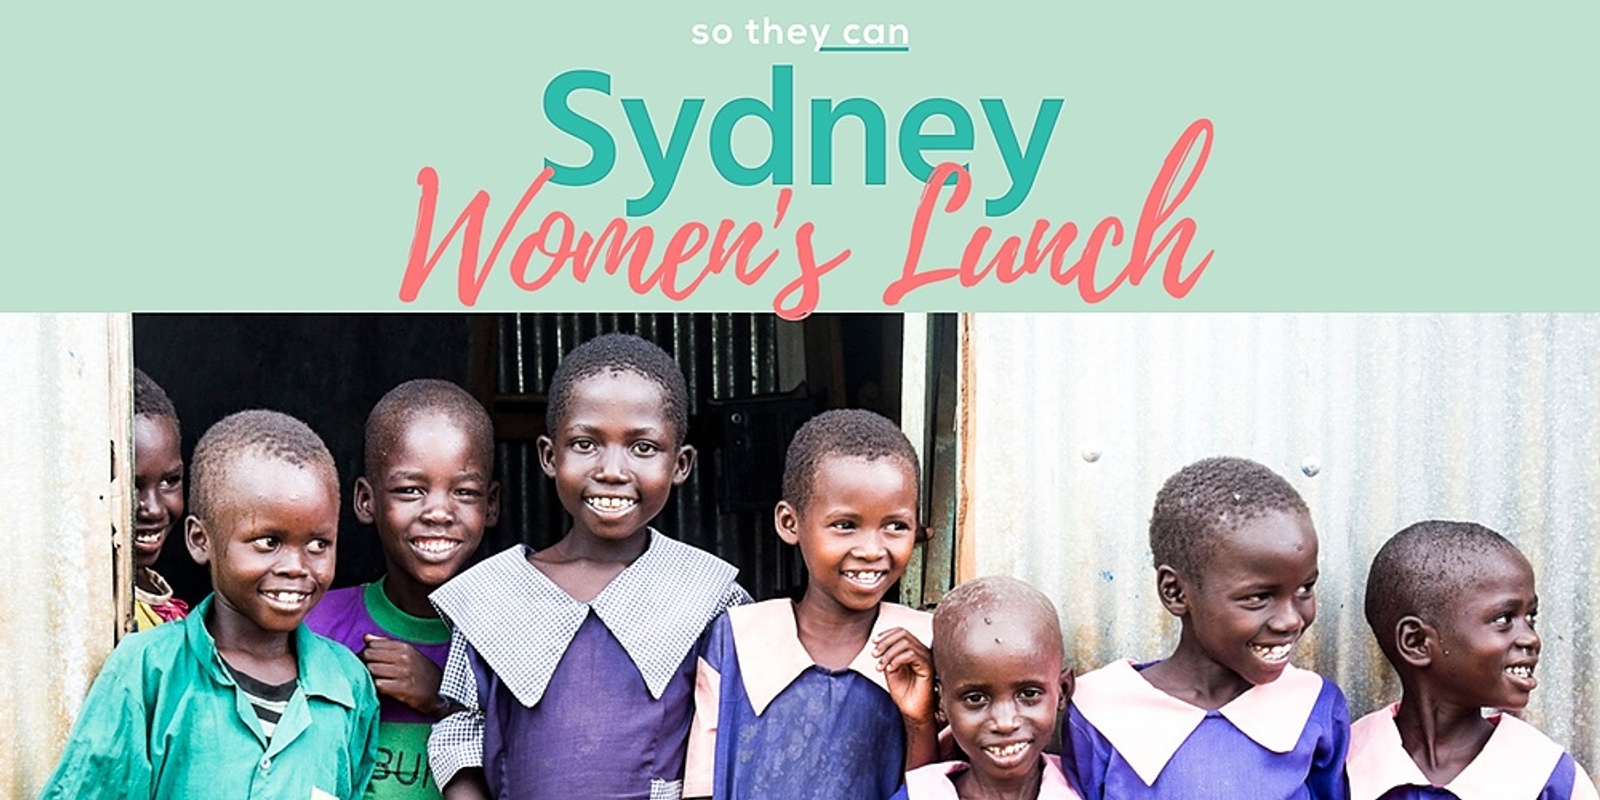 Banner image for So They Can's 2021 Sydney Women's Lunch